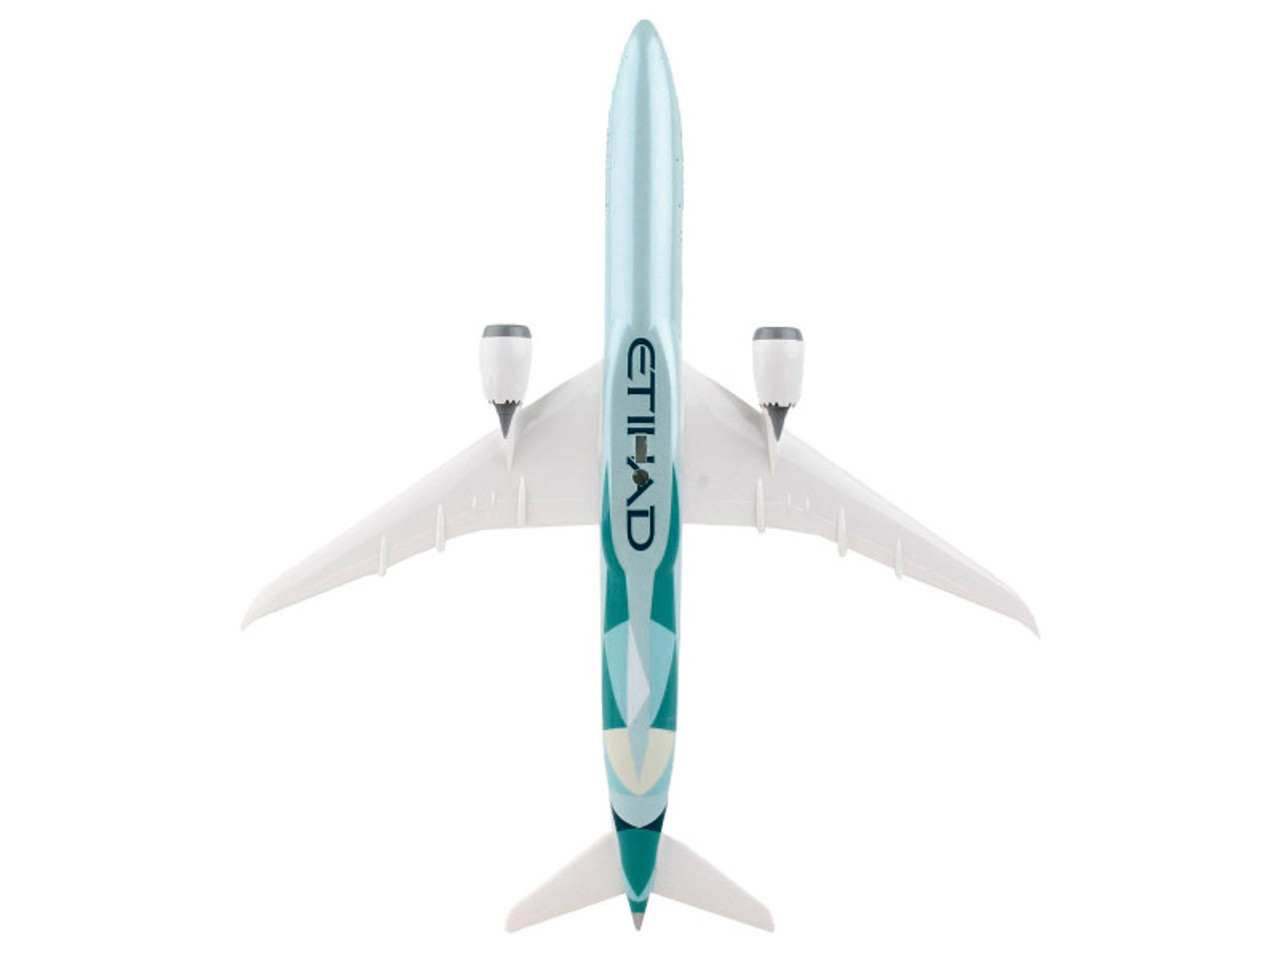 Boeing 787-10 Dreamliner Commercial Aircraft "Etihad Airways" (A6-BMH) Light Green with Tail Graphics (Snap-Fit) 1/200 Plastic Model by Skymarks